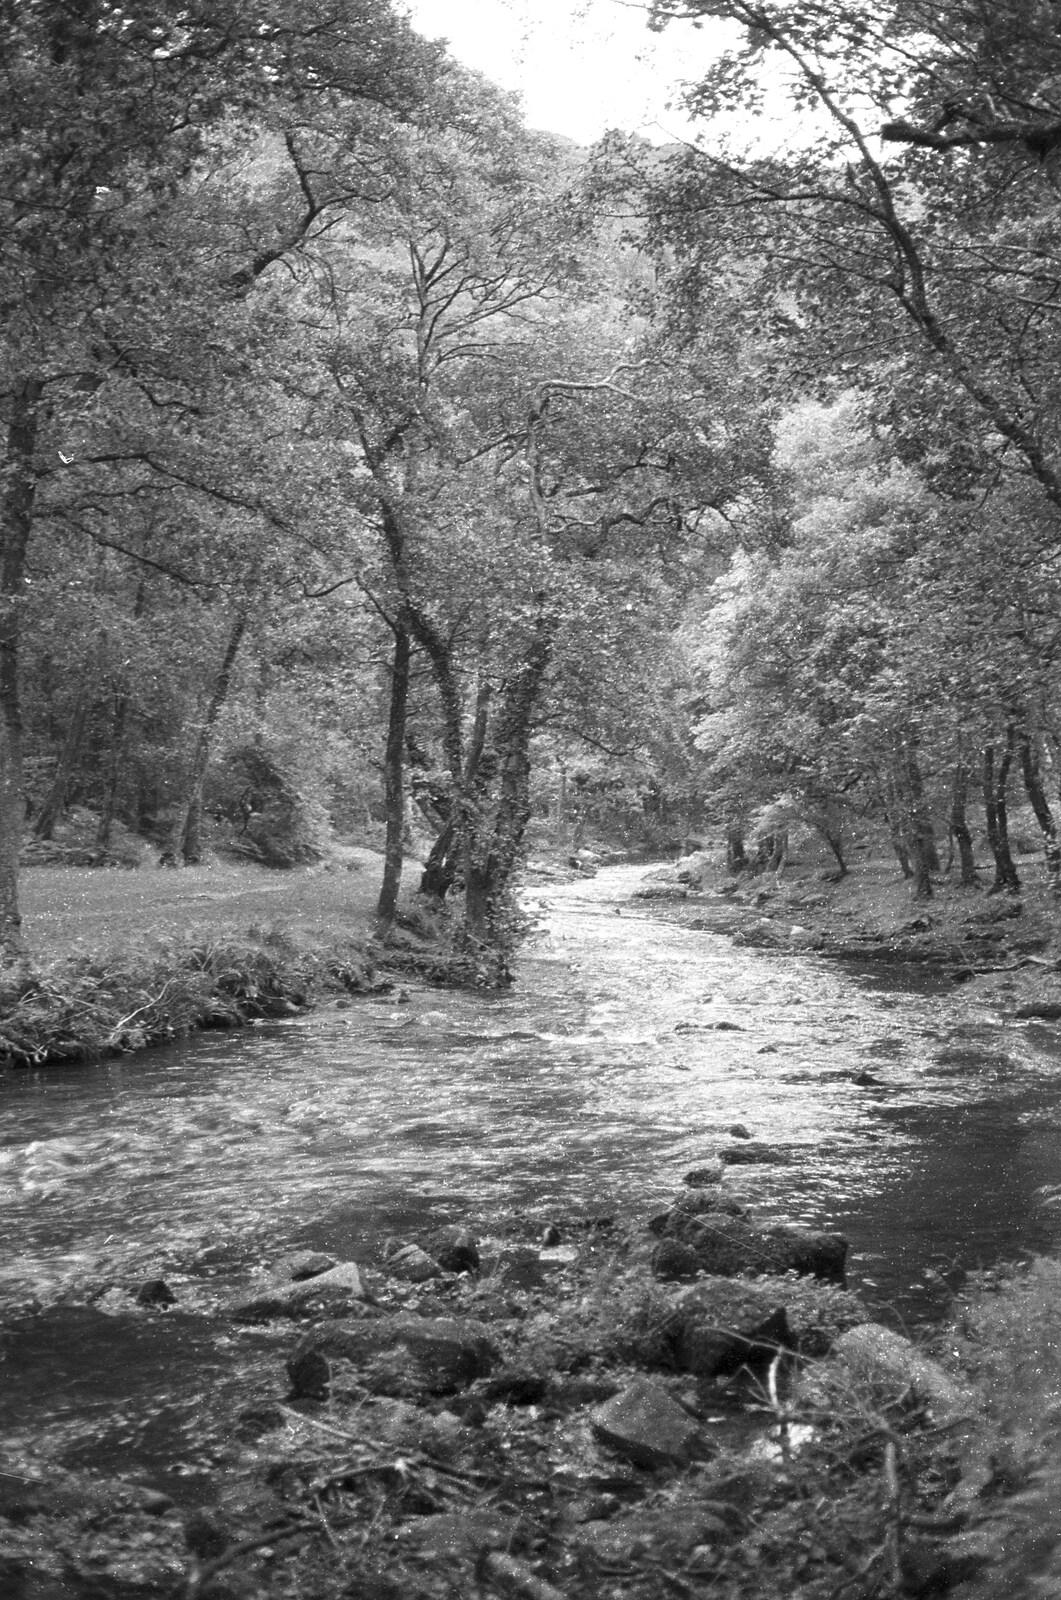 London Party and a Trip to Mother's, Hoo Meavy, Devon - 5th August 1993: The river at the bottom of the valley